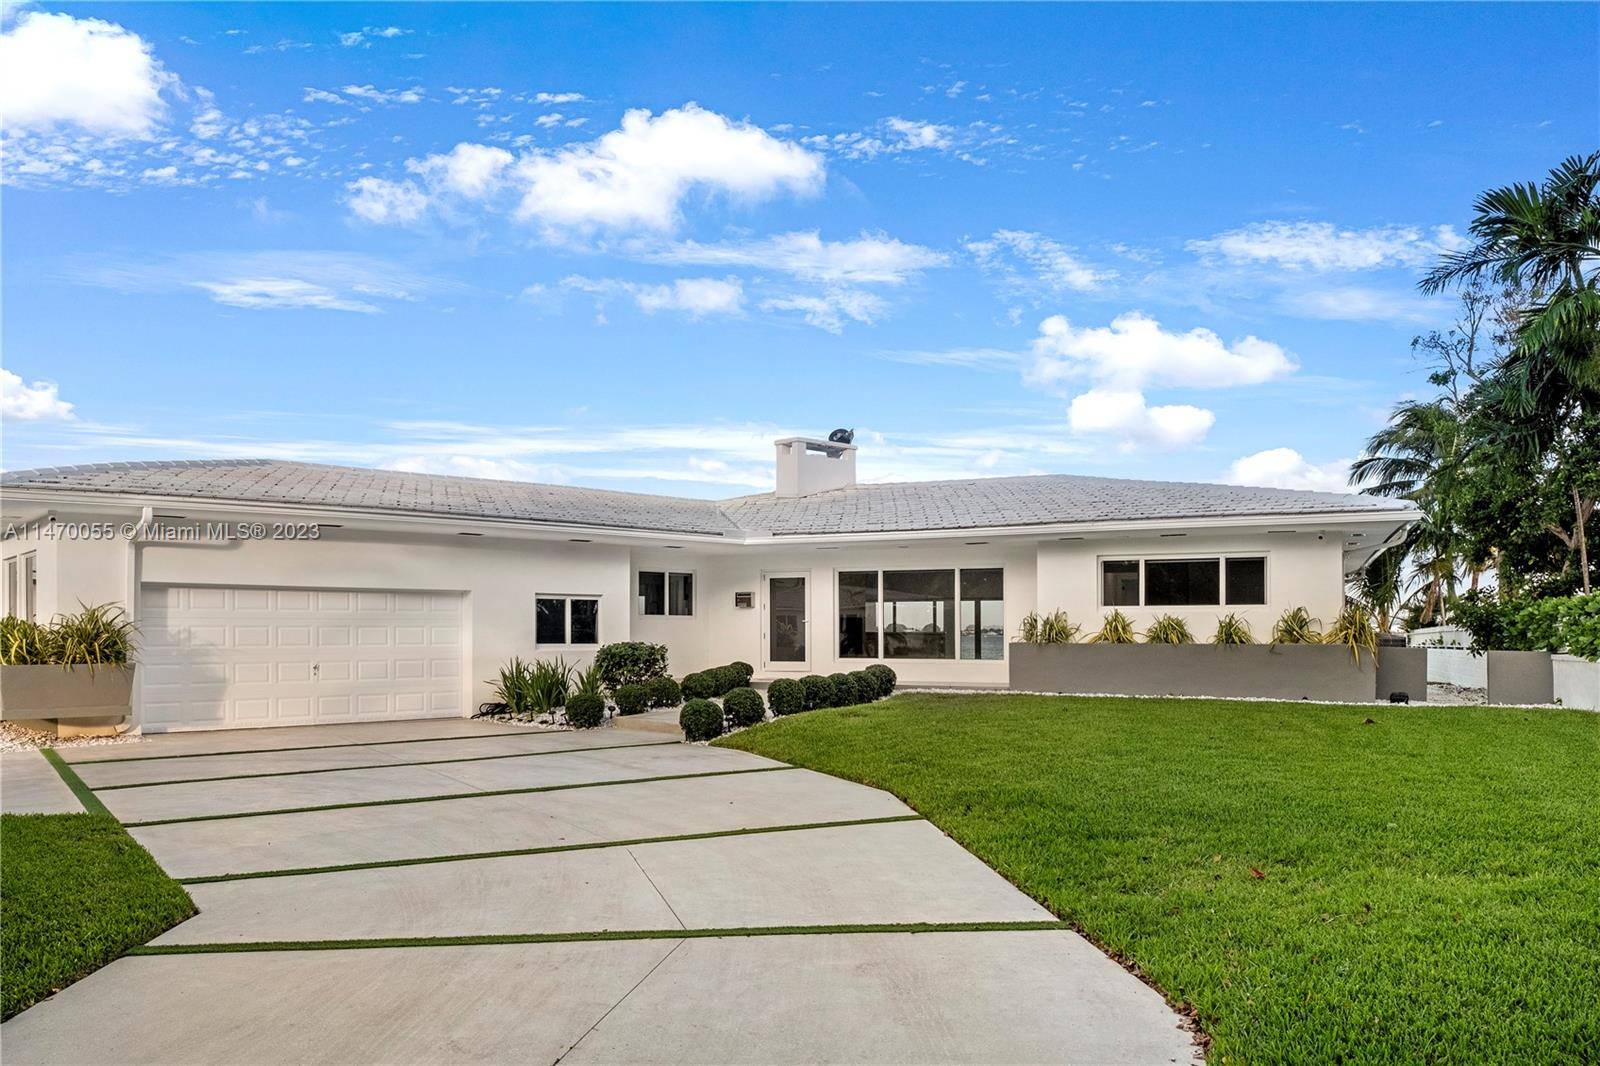 Welcome to this stunning Miami Shores gem !